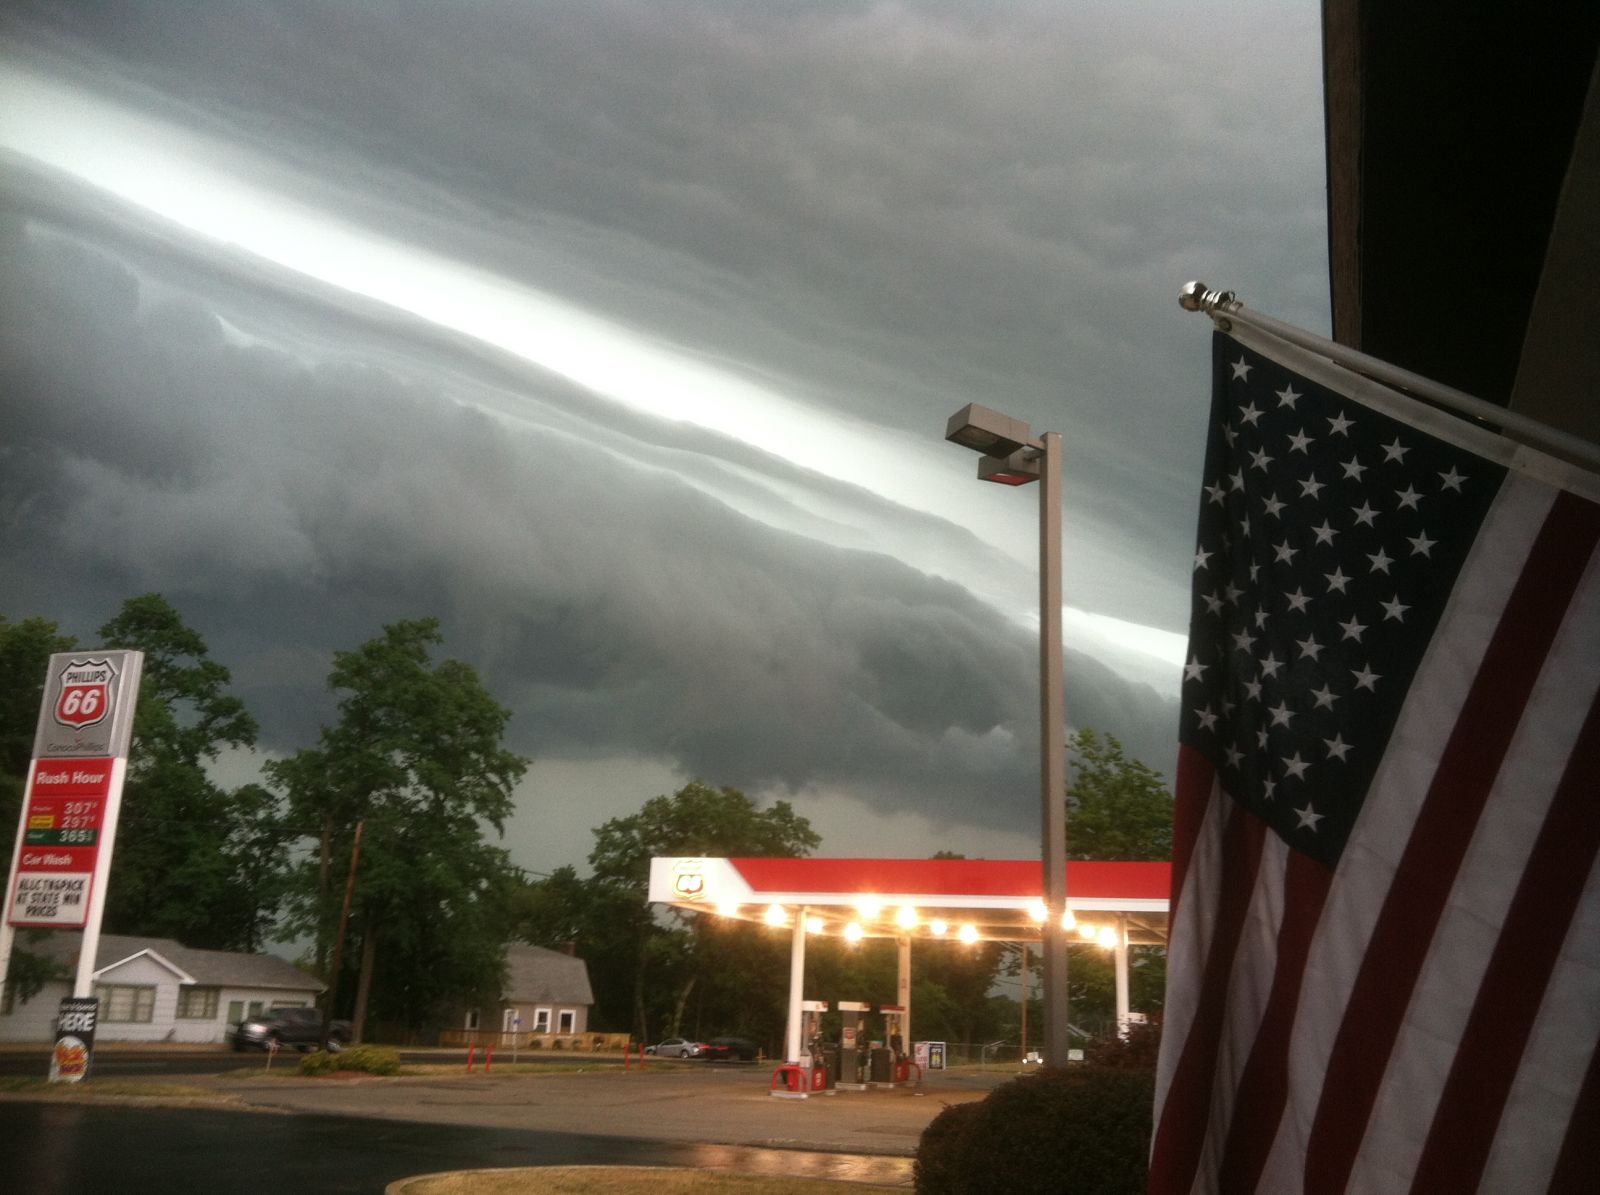 Photo of the shelf cloud that preceded the Derecho in LaPorte, IN (courtesy of Kevin Gould)